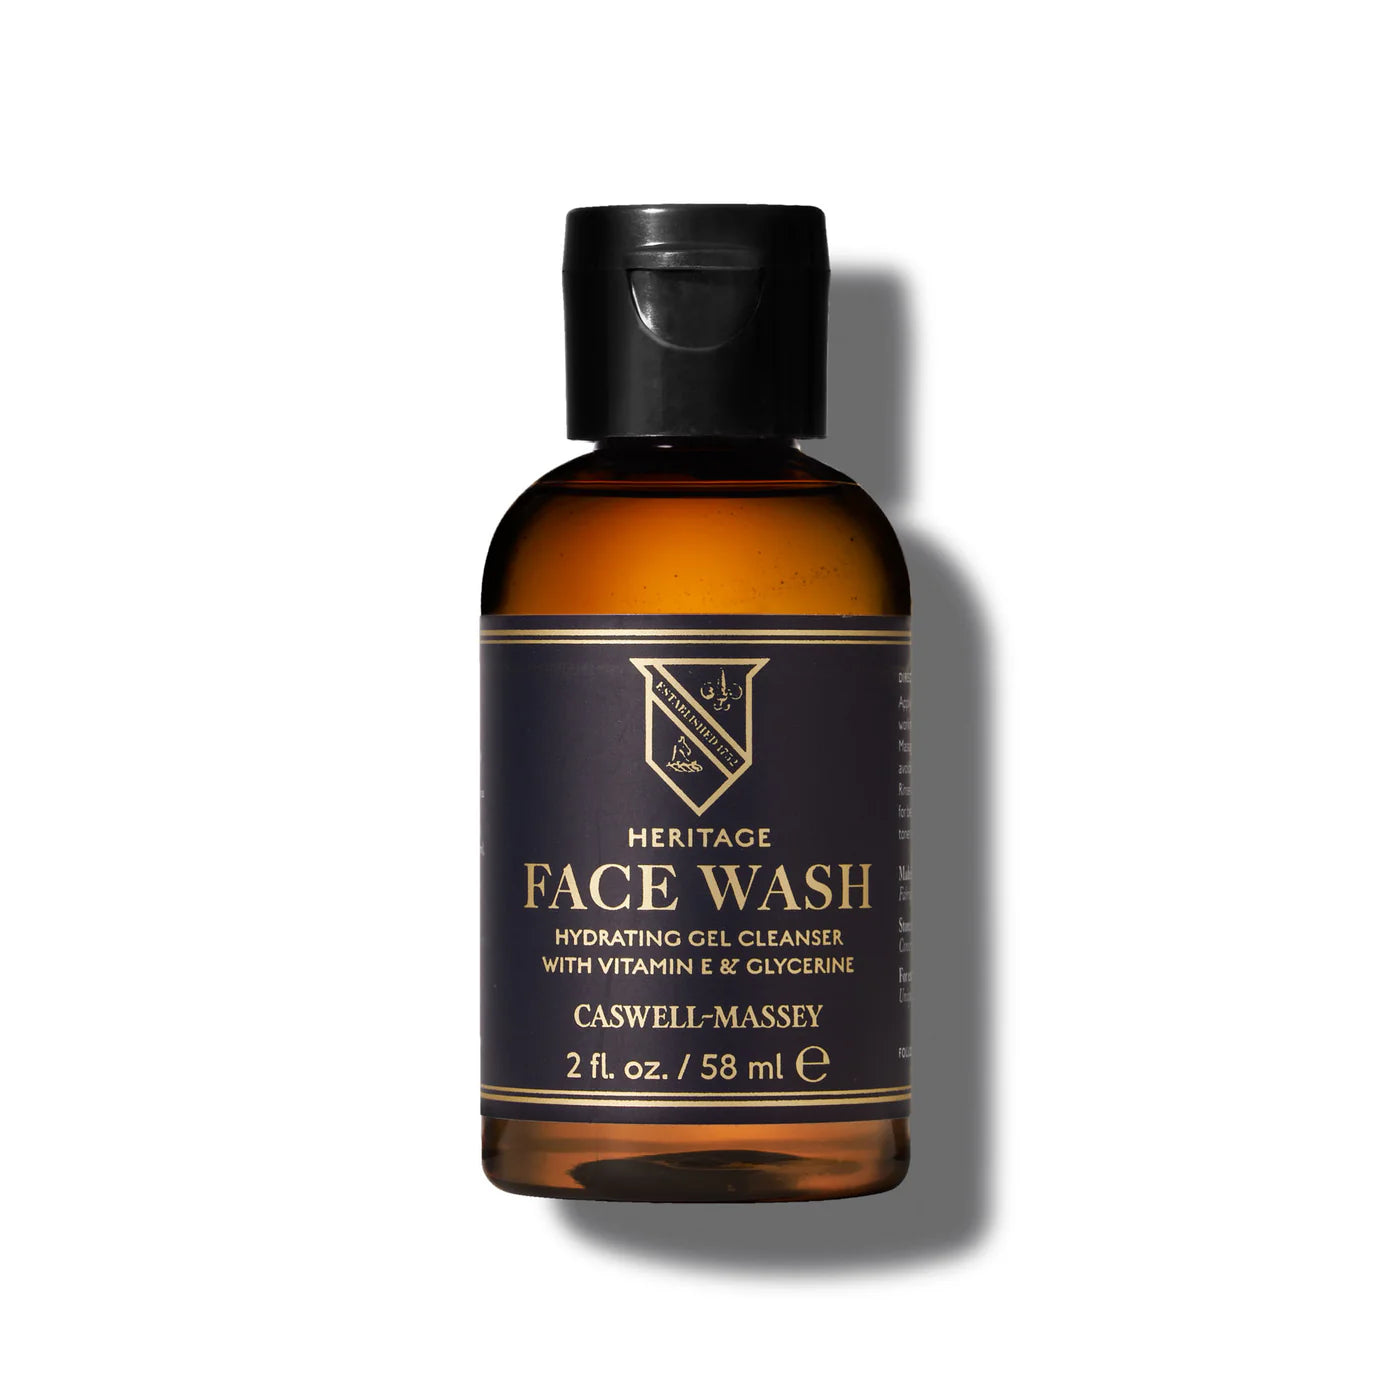 Caswell-Massey Face Wash Trial Size 2 oz